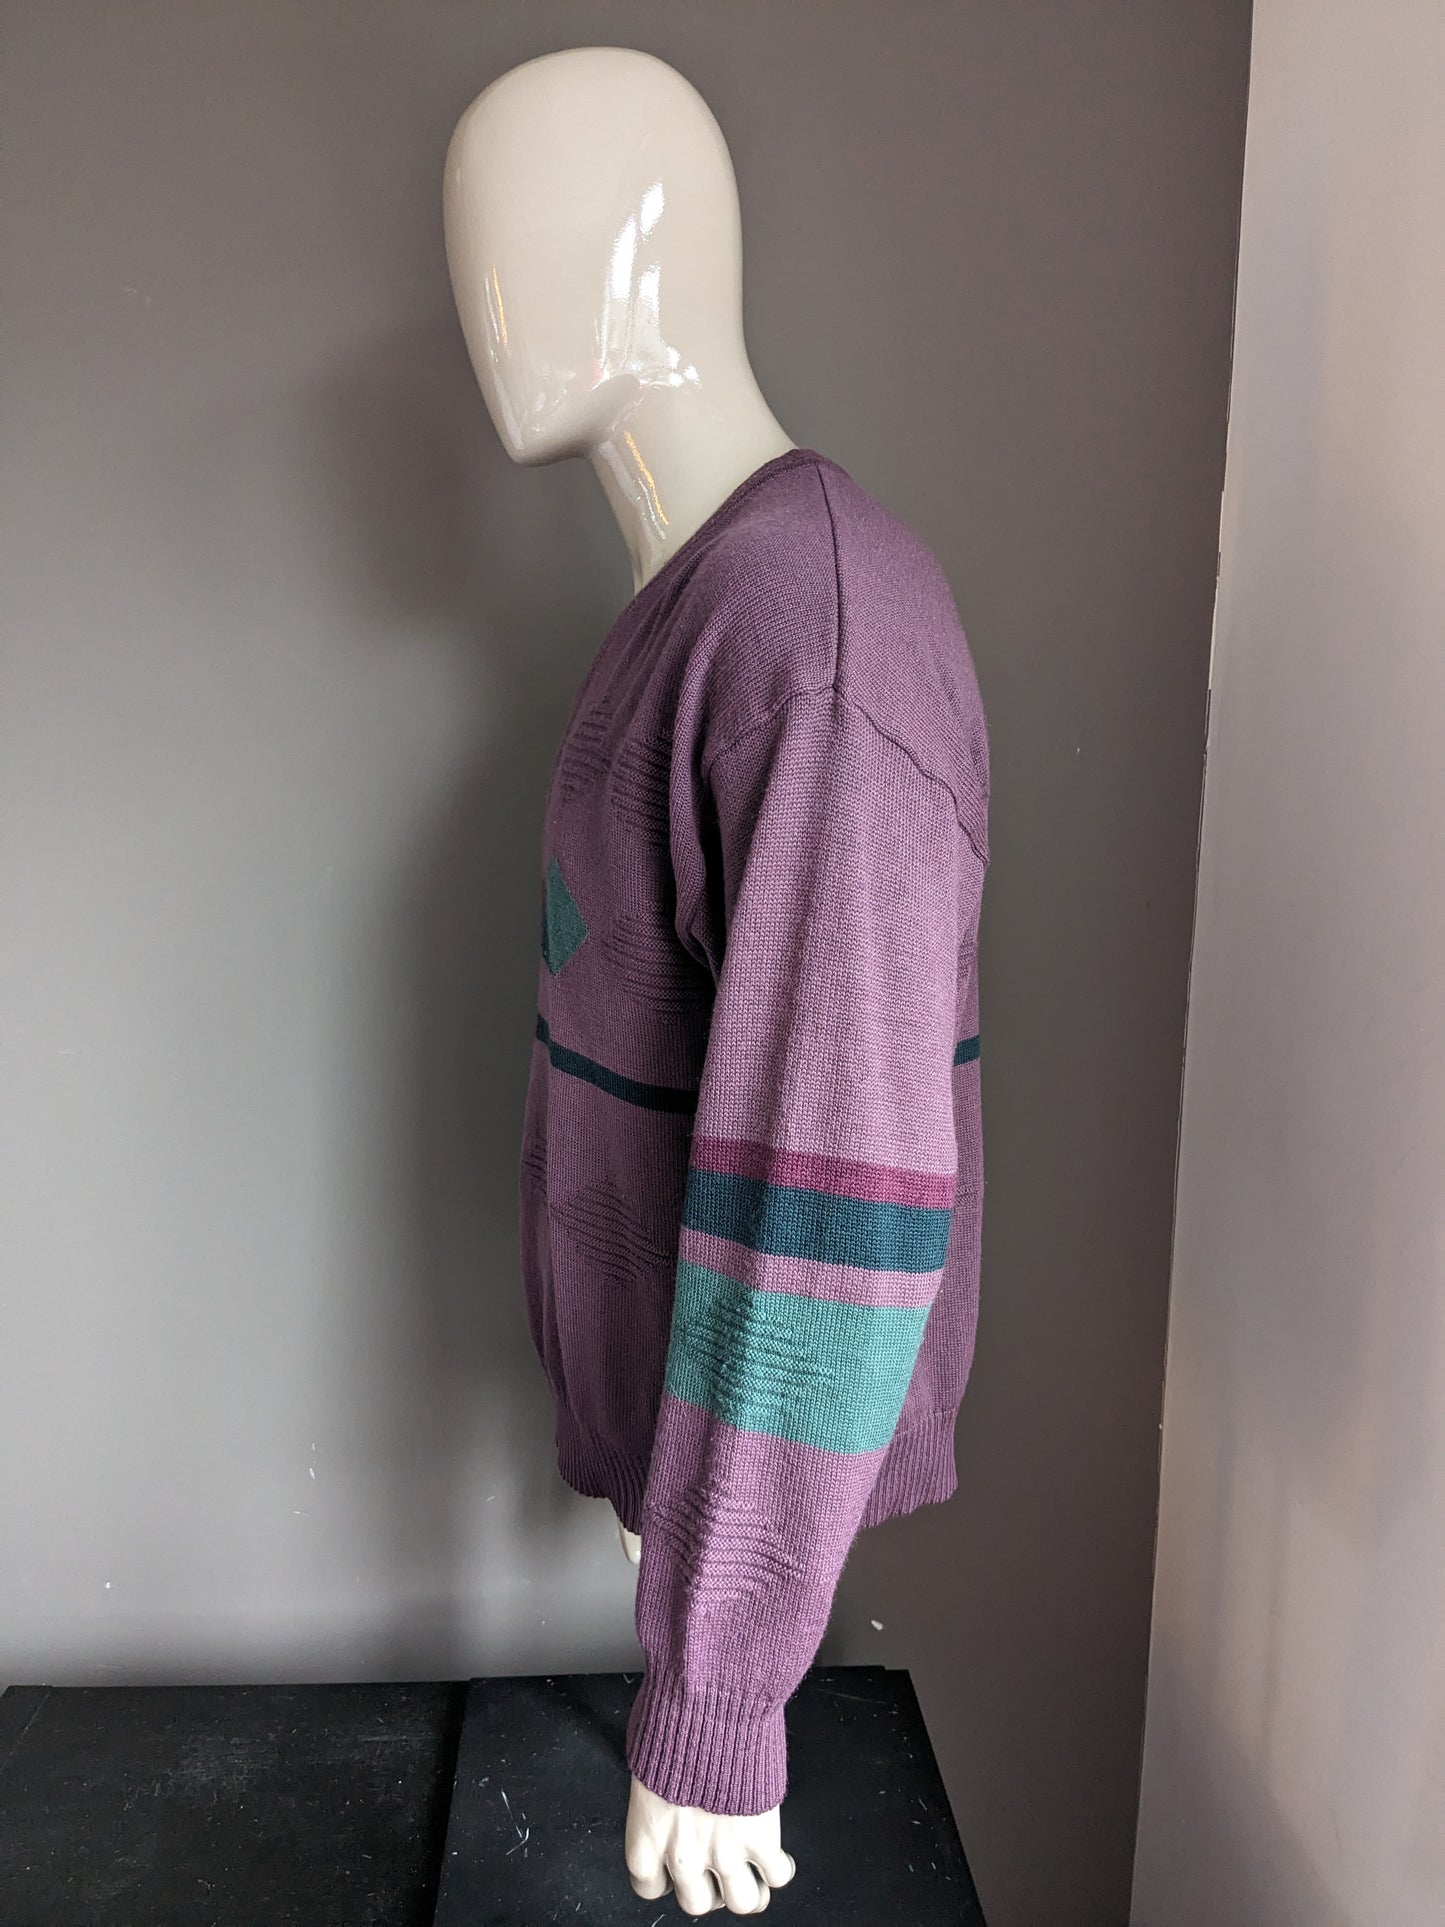 Vintage Sunny woolen sweater with v-neck. Purple green colored. Size XL. 50% wool.